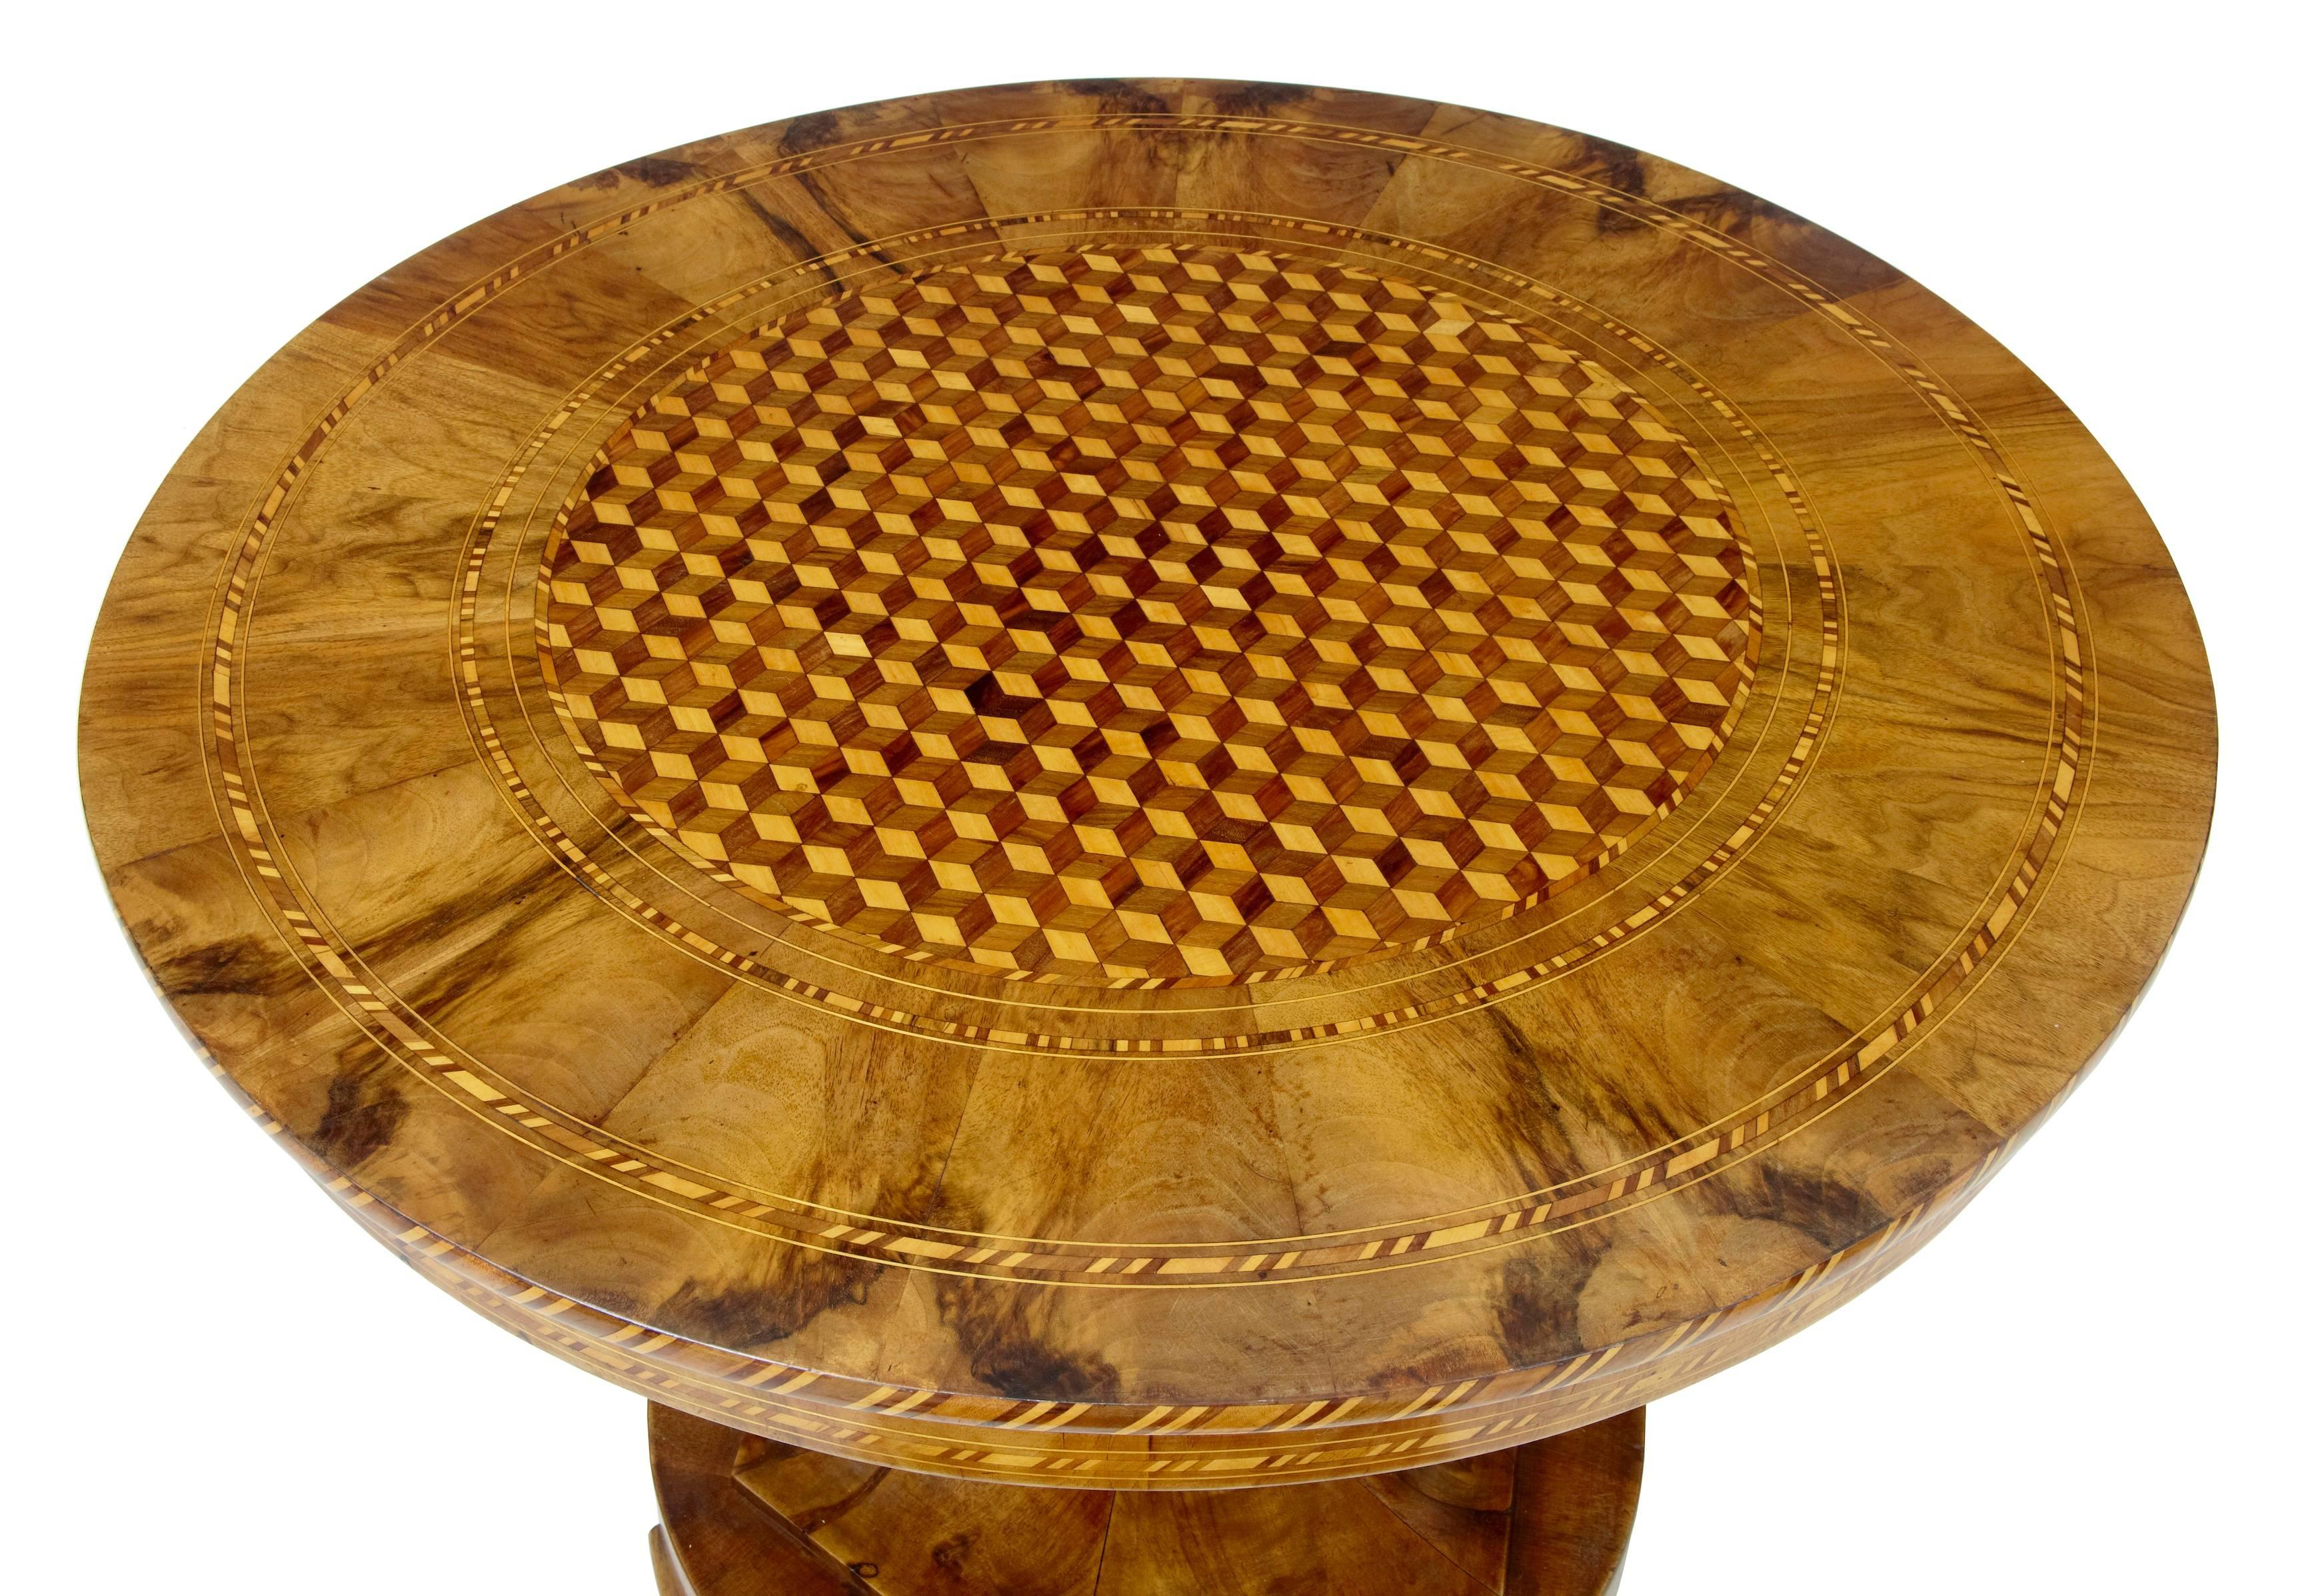 We are pleased to offer you an excellent quality mid-19th century center table, circa 1850.
Beautifully inlaid in the centre with a box M. C. Escher like pattern. Further inlaid with mahogany, satinwood and boxwood.
Standing on a walnut column